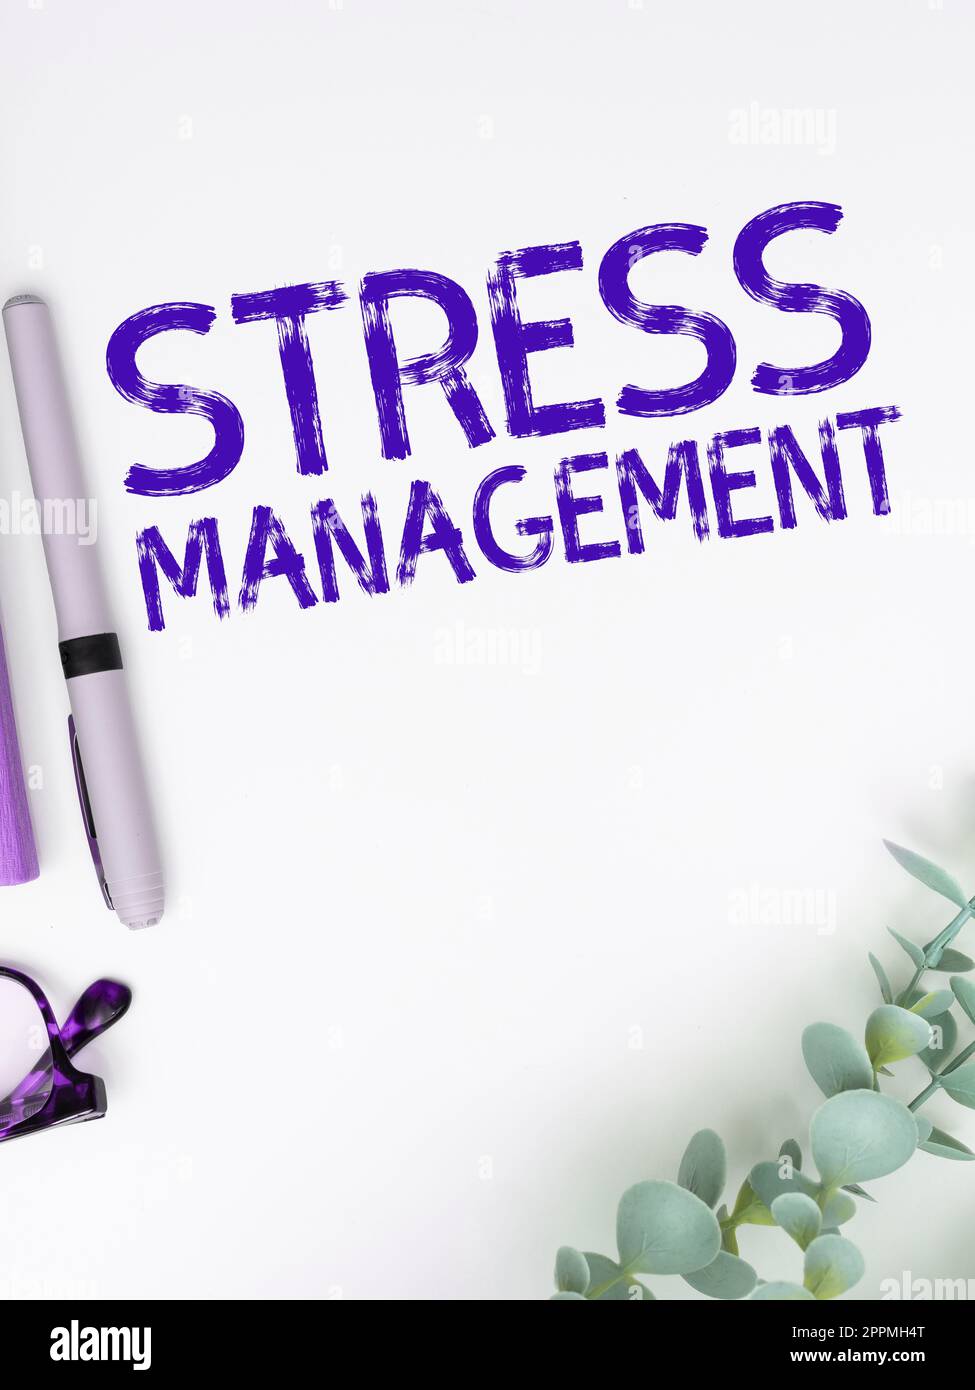 Handwriting text Stress Management. Business idea learning ways of behaving and thinking that reduce stress Stock Photo